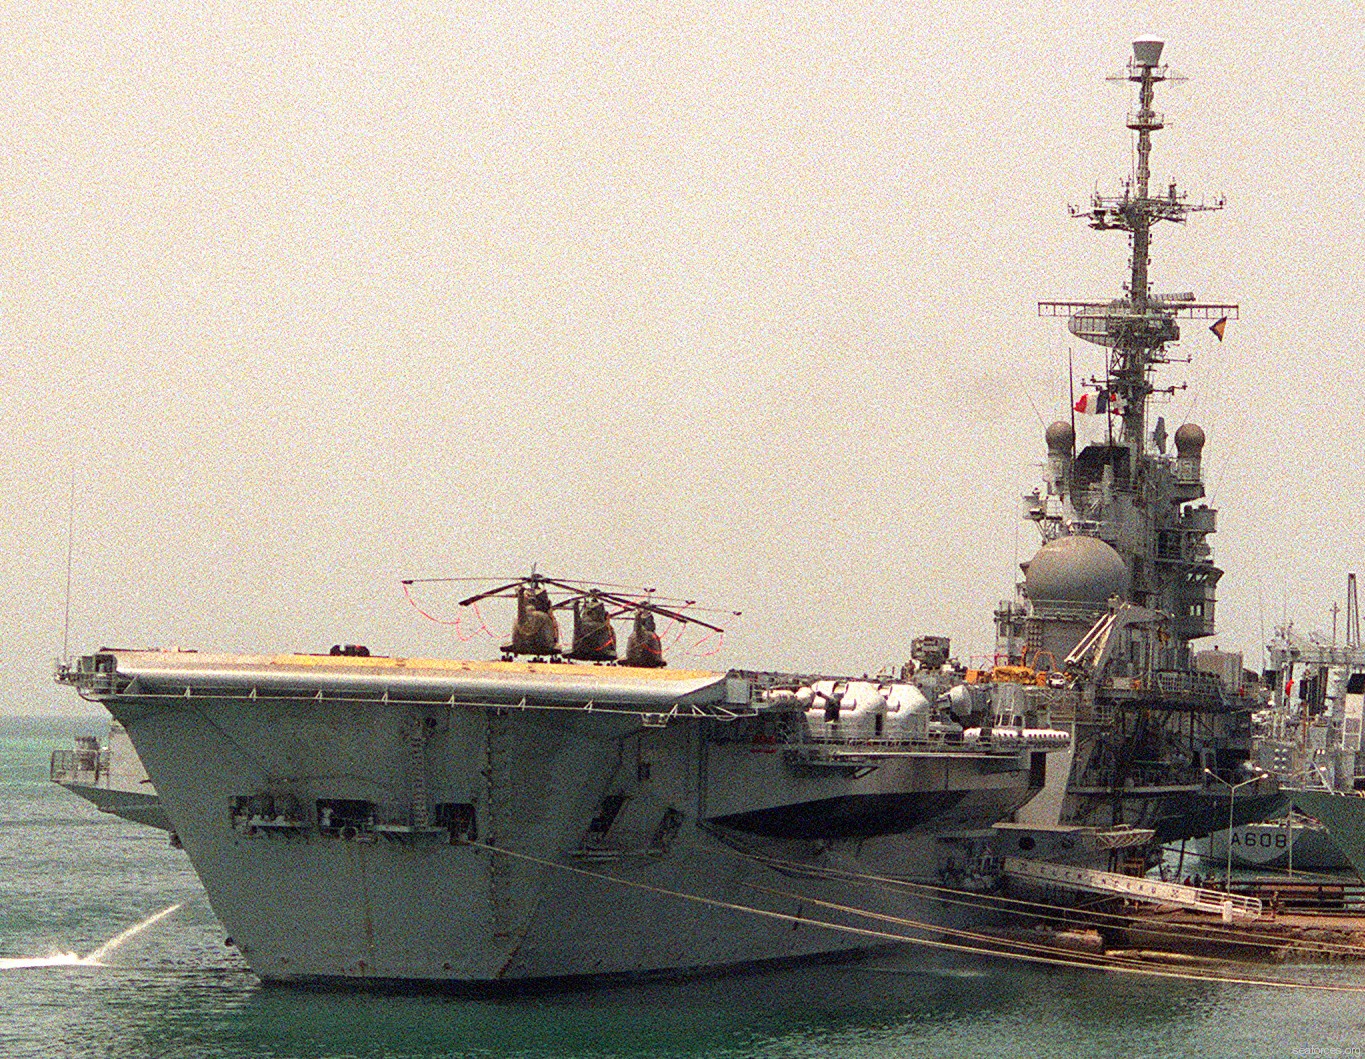 r-98 fs clemenceau aircraft carrier french navy marine nationale 07